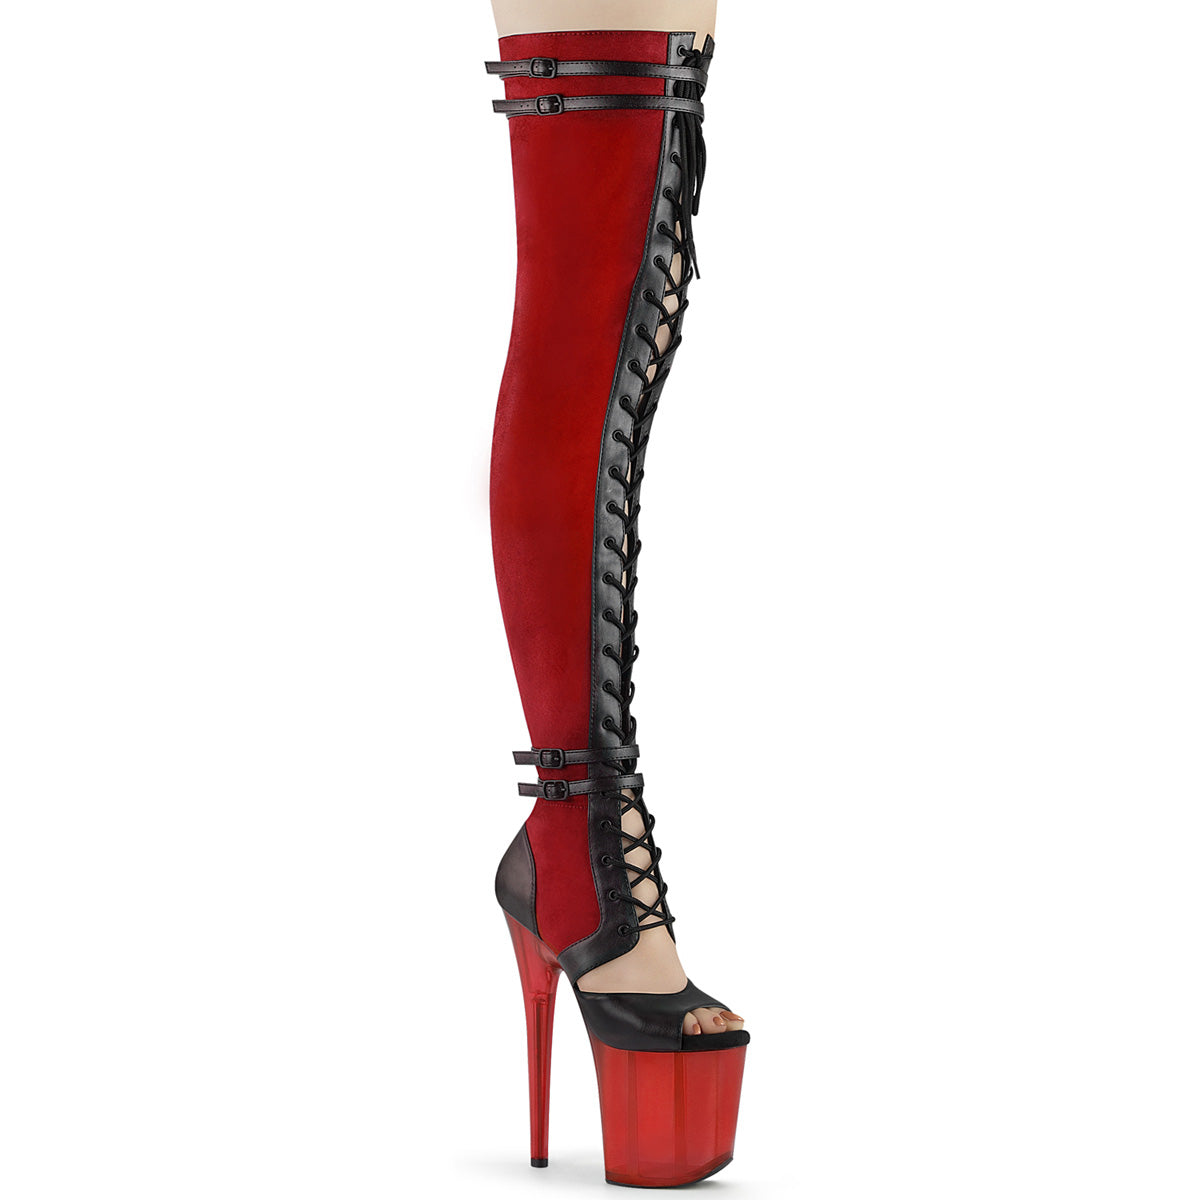 FLAMINGO-3027 Pleasers Platform Shoes (Exotic Dancing Heels) Thigh High Boots Pleasers